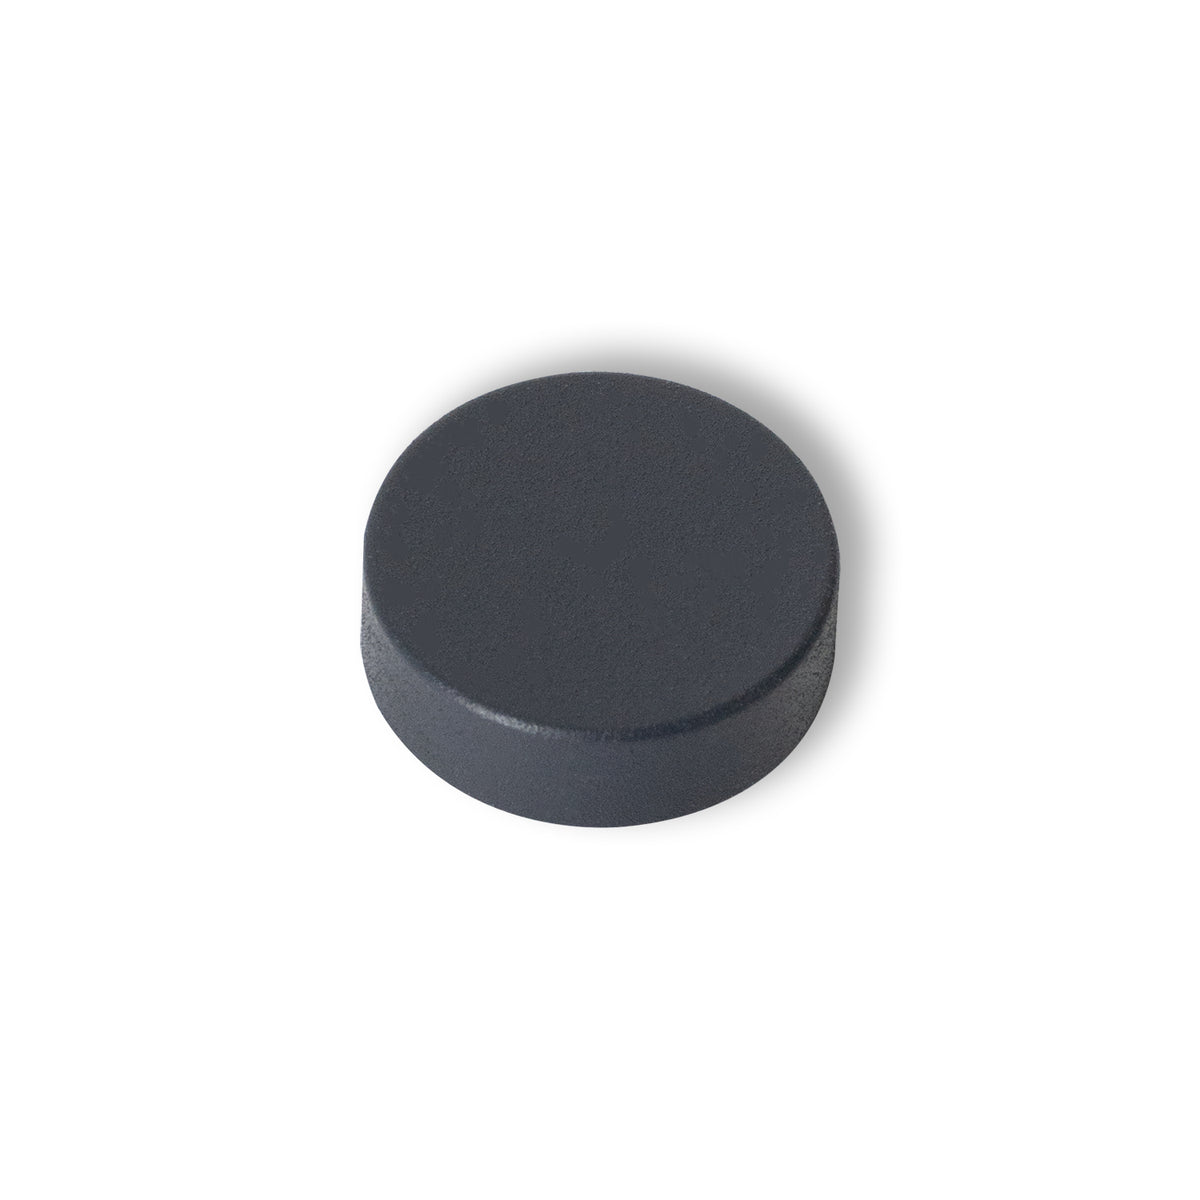 Anthracite Cover Caps For Heated Towel Rail